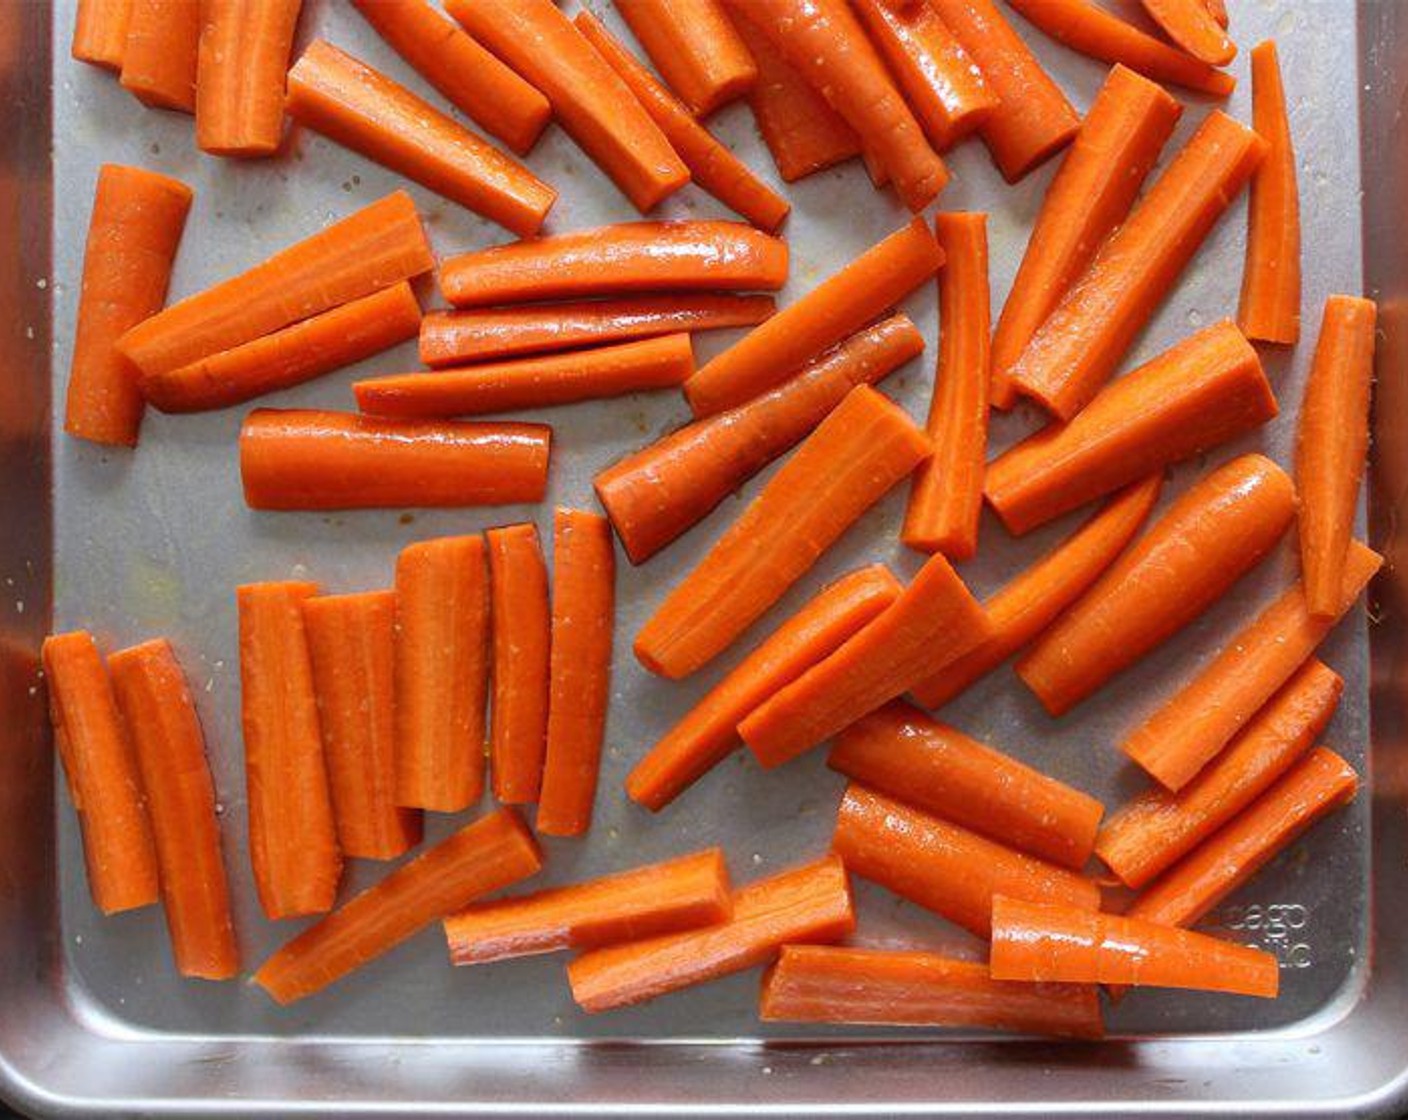 step 2 Cut the Carrots (7 1/2 cups) into pieces that are about 2-3-inches by 1/2-inch thick. Every carrot is different, so don’t worry if your measurements aren’t exact. Place in a large mixing bowl and toss well with the Extra-Virgin Olive Oil (3 Tbsp) and Kosher Salt (1 tsp).